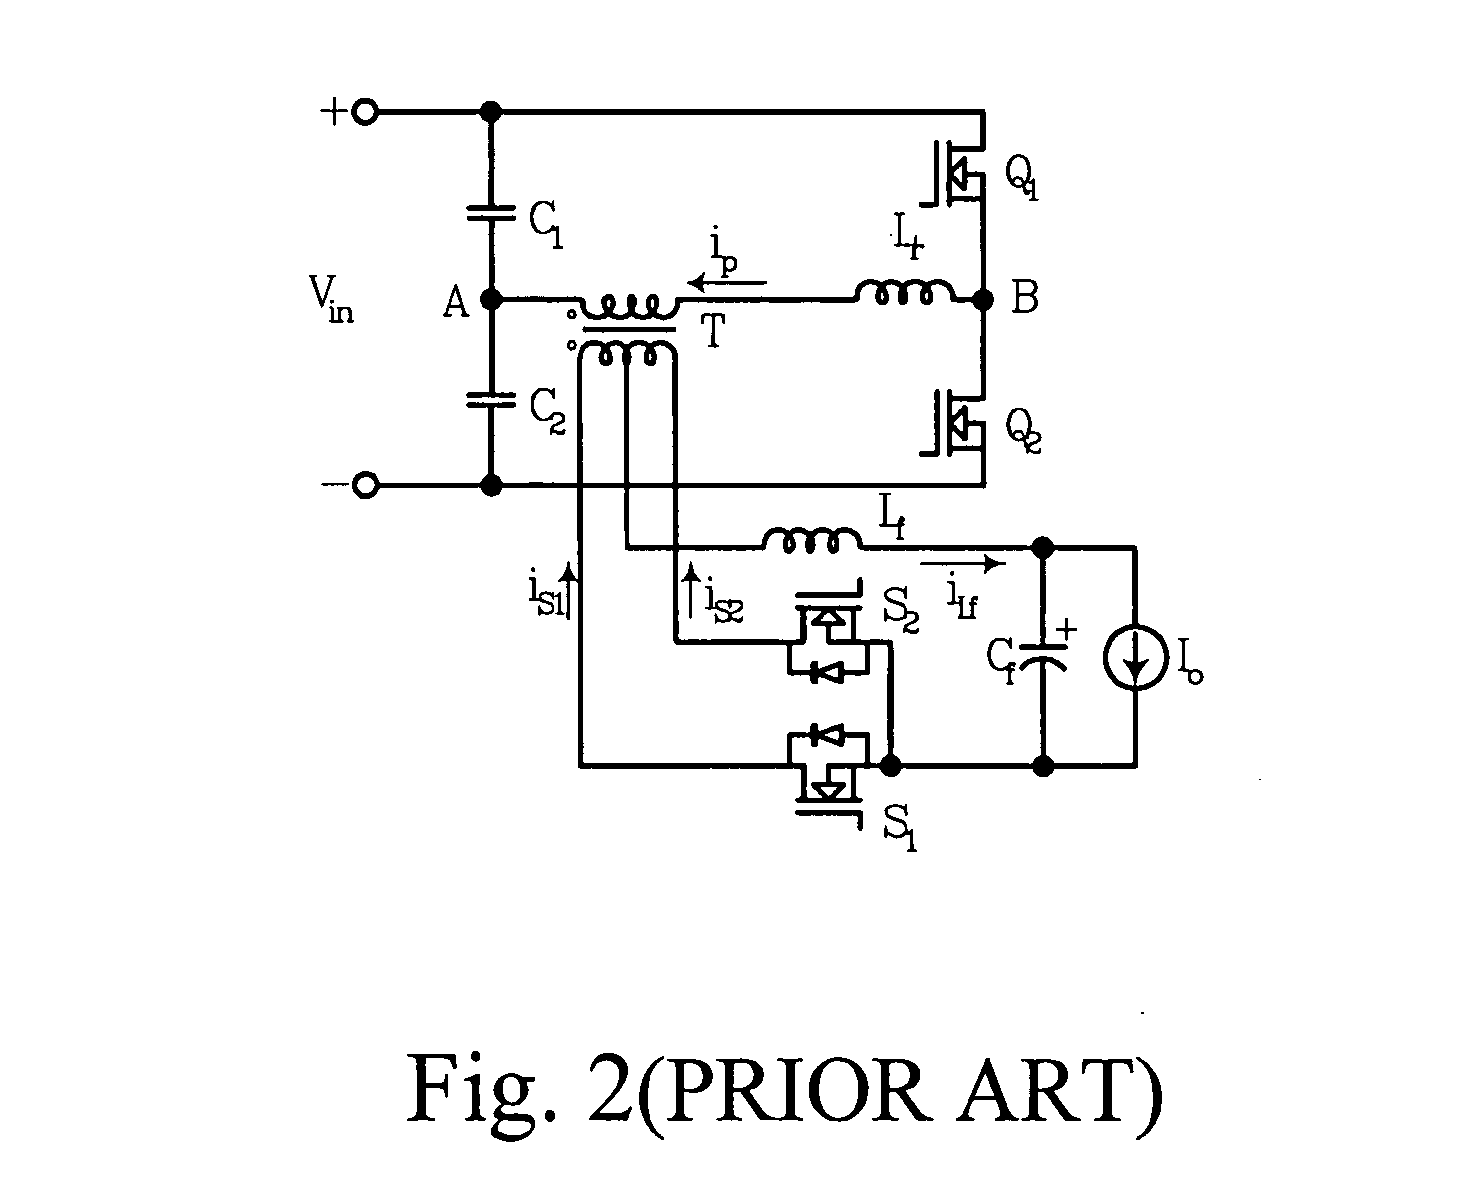 Converter with synchronous rectifier with ZVS